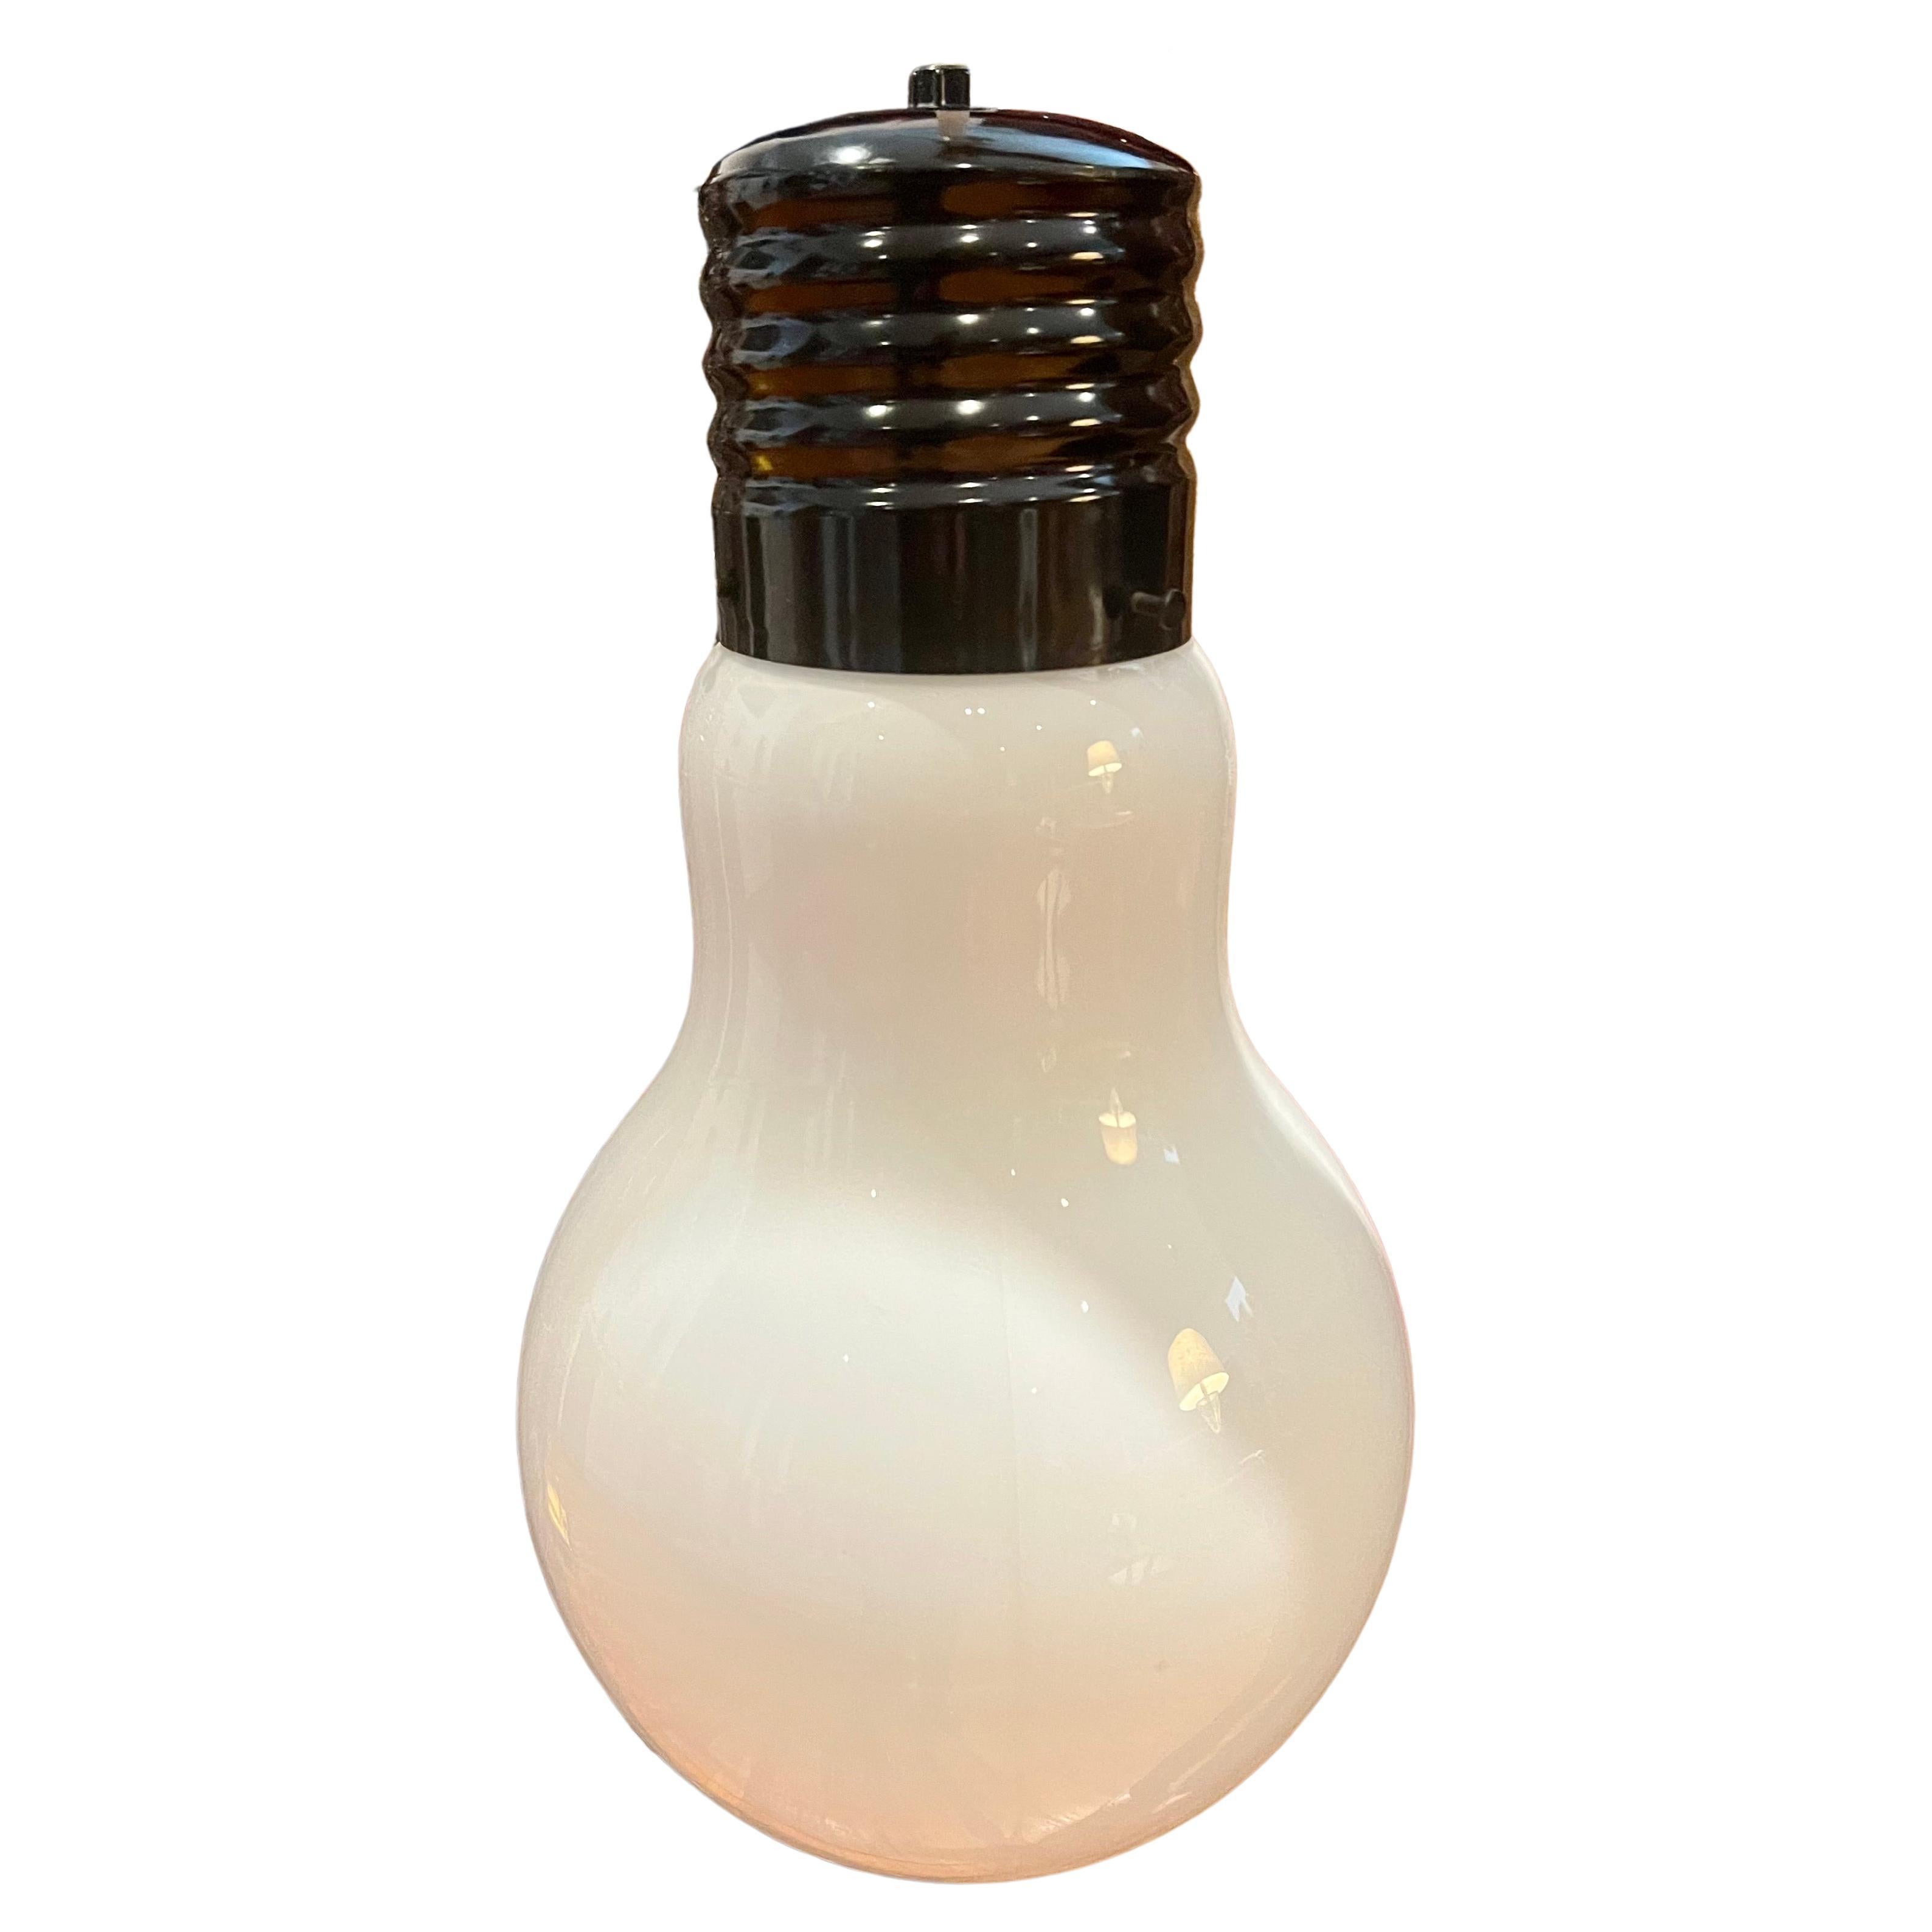 Striking large milk glass light bulb chandelier, in original condition with white plug-in cord and switch, excellent and working condition a very unique piece.